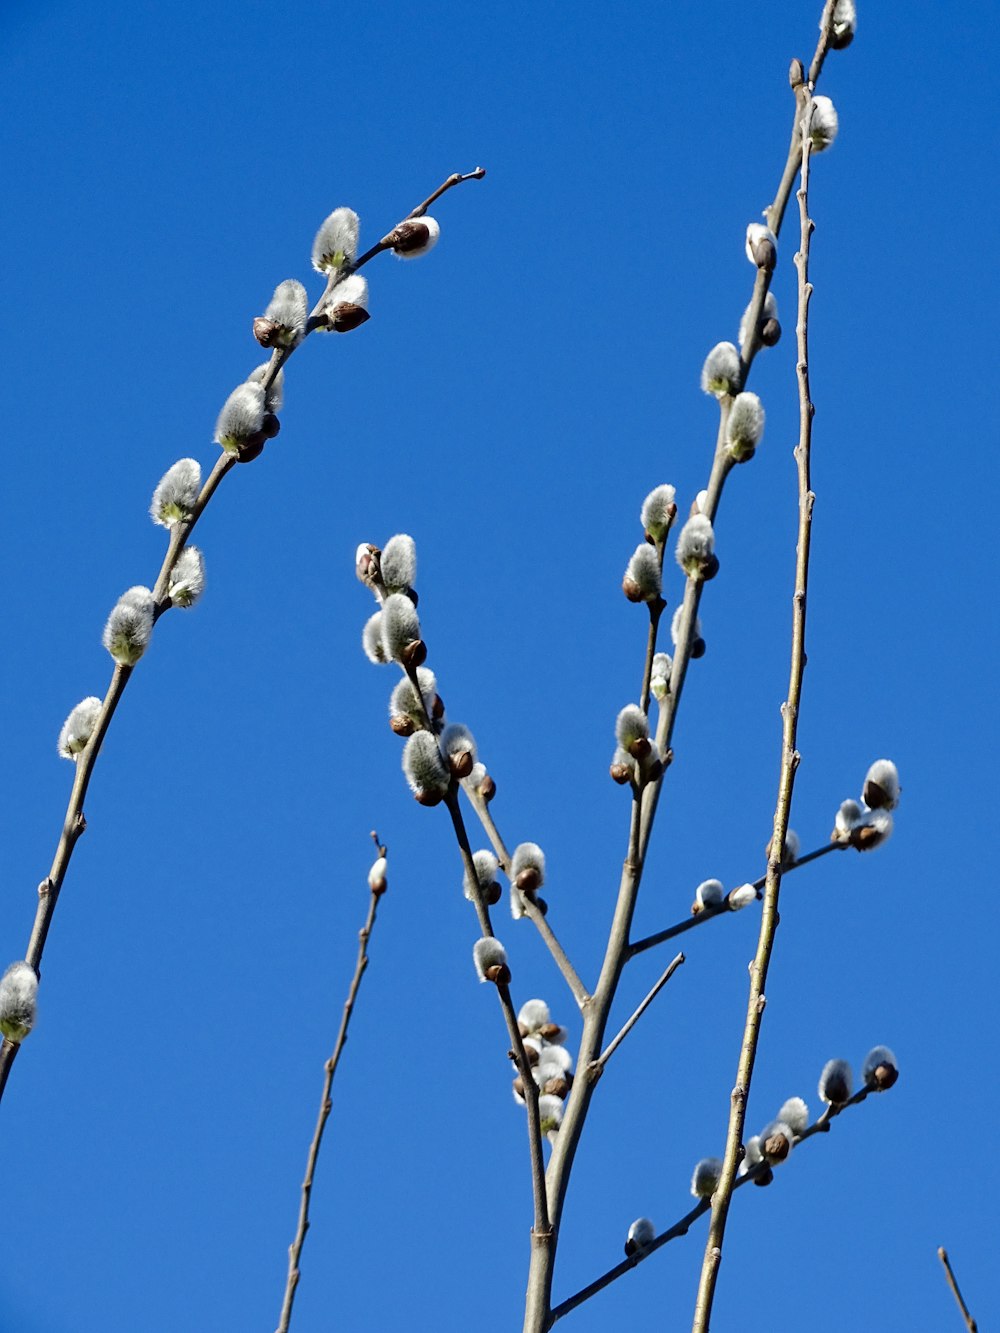 white round fruits on wire under blue sky during daytime